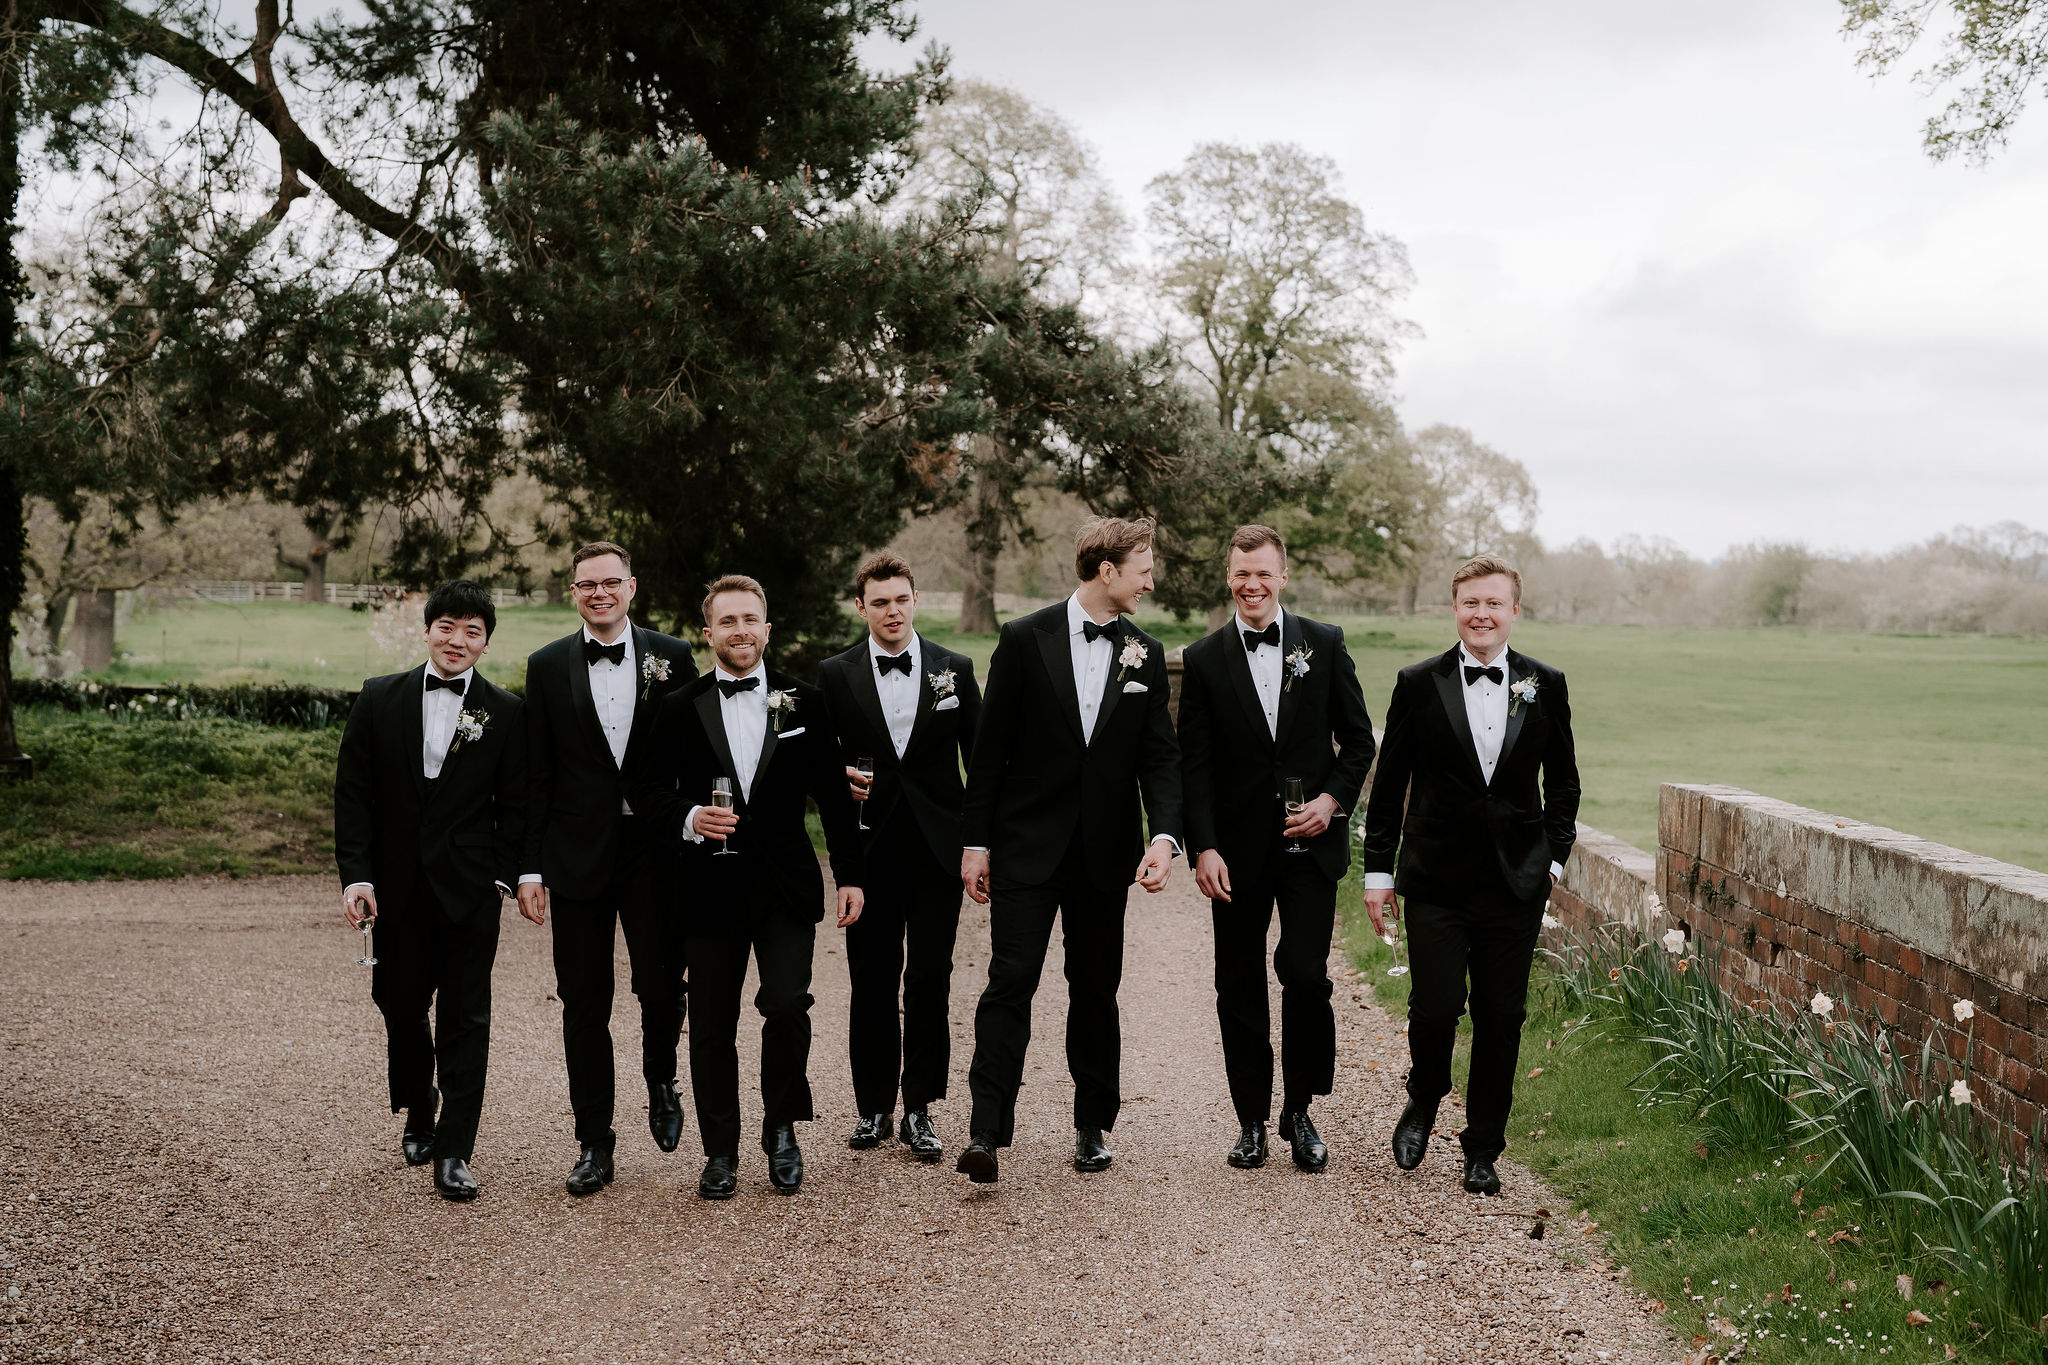 Seven men in black tie walk towards the camera on a gravel drive. There are fields in the background and daffodils line the edge of the drive